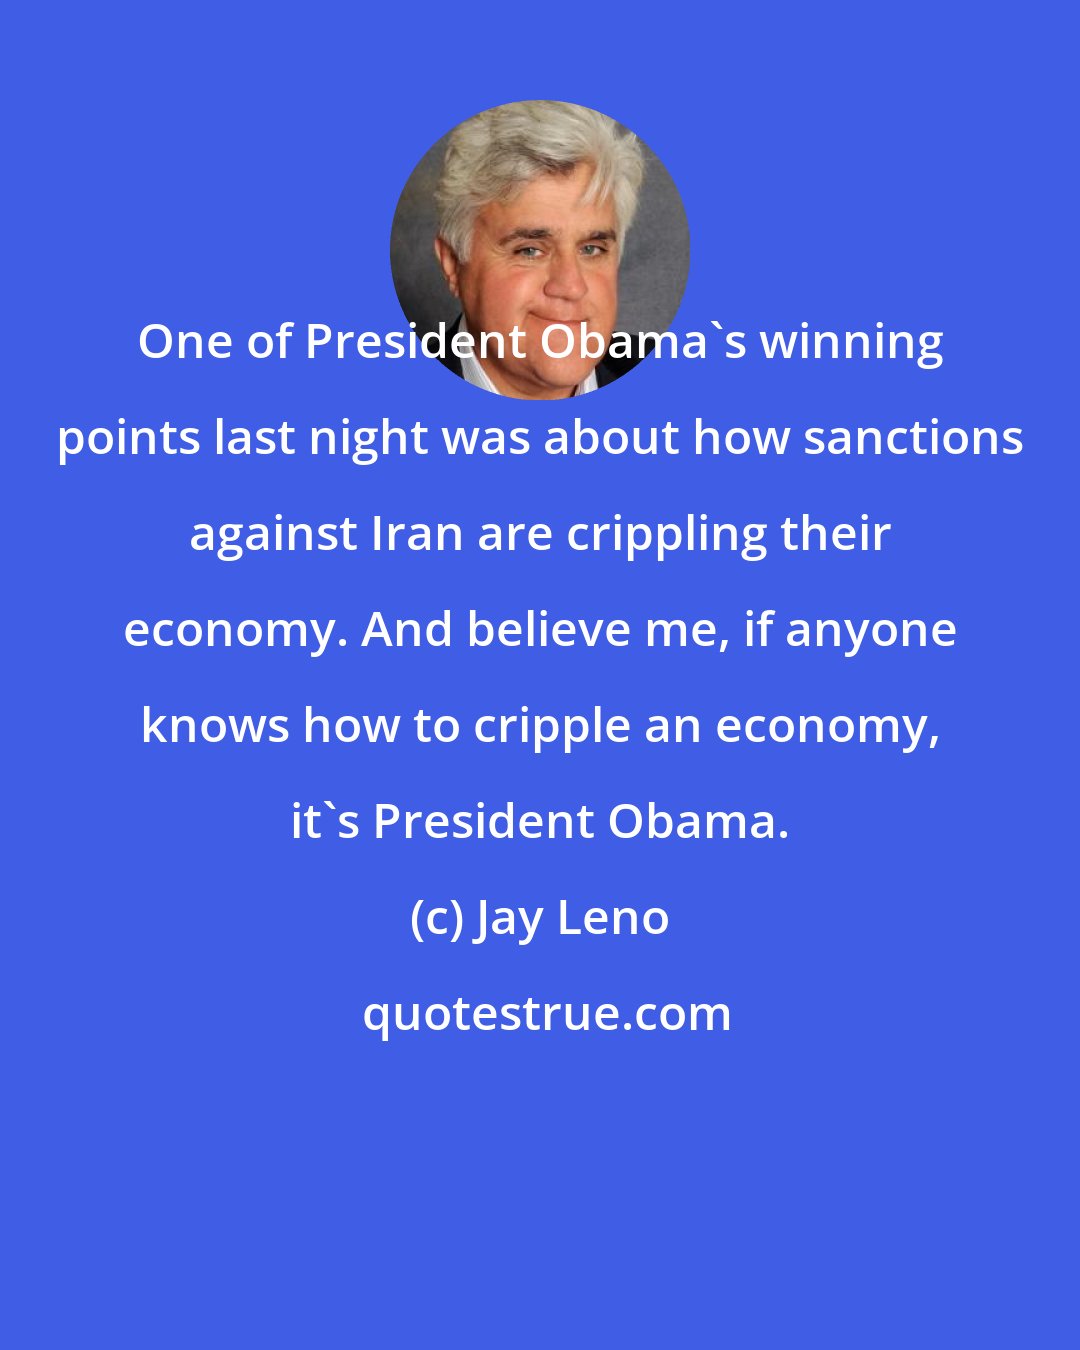 Jay Leno: One of President Obama's winning points last night was about how sanctions against Iran are crippling their economy. And believe me, if anyone knows how to cripple an economy, it's President Obama.